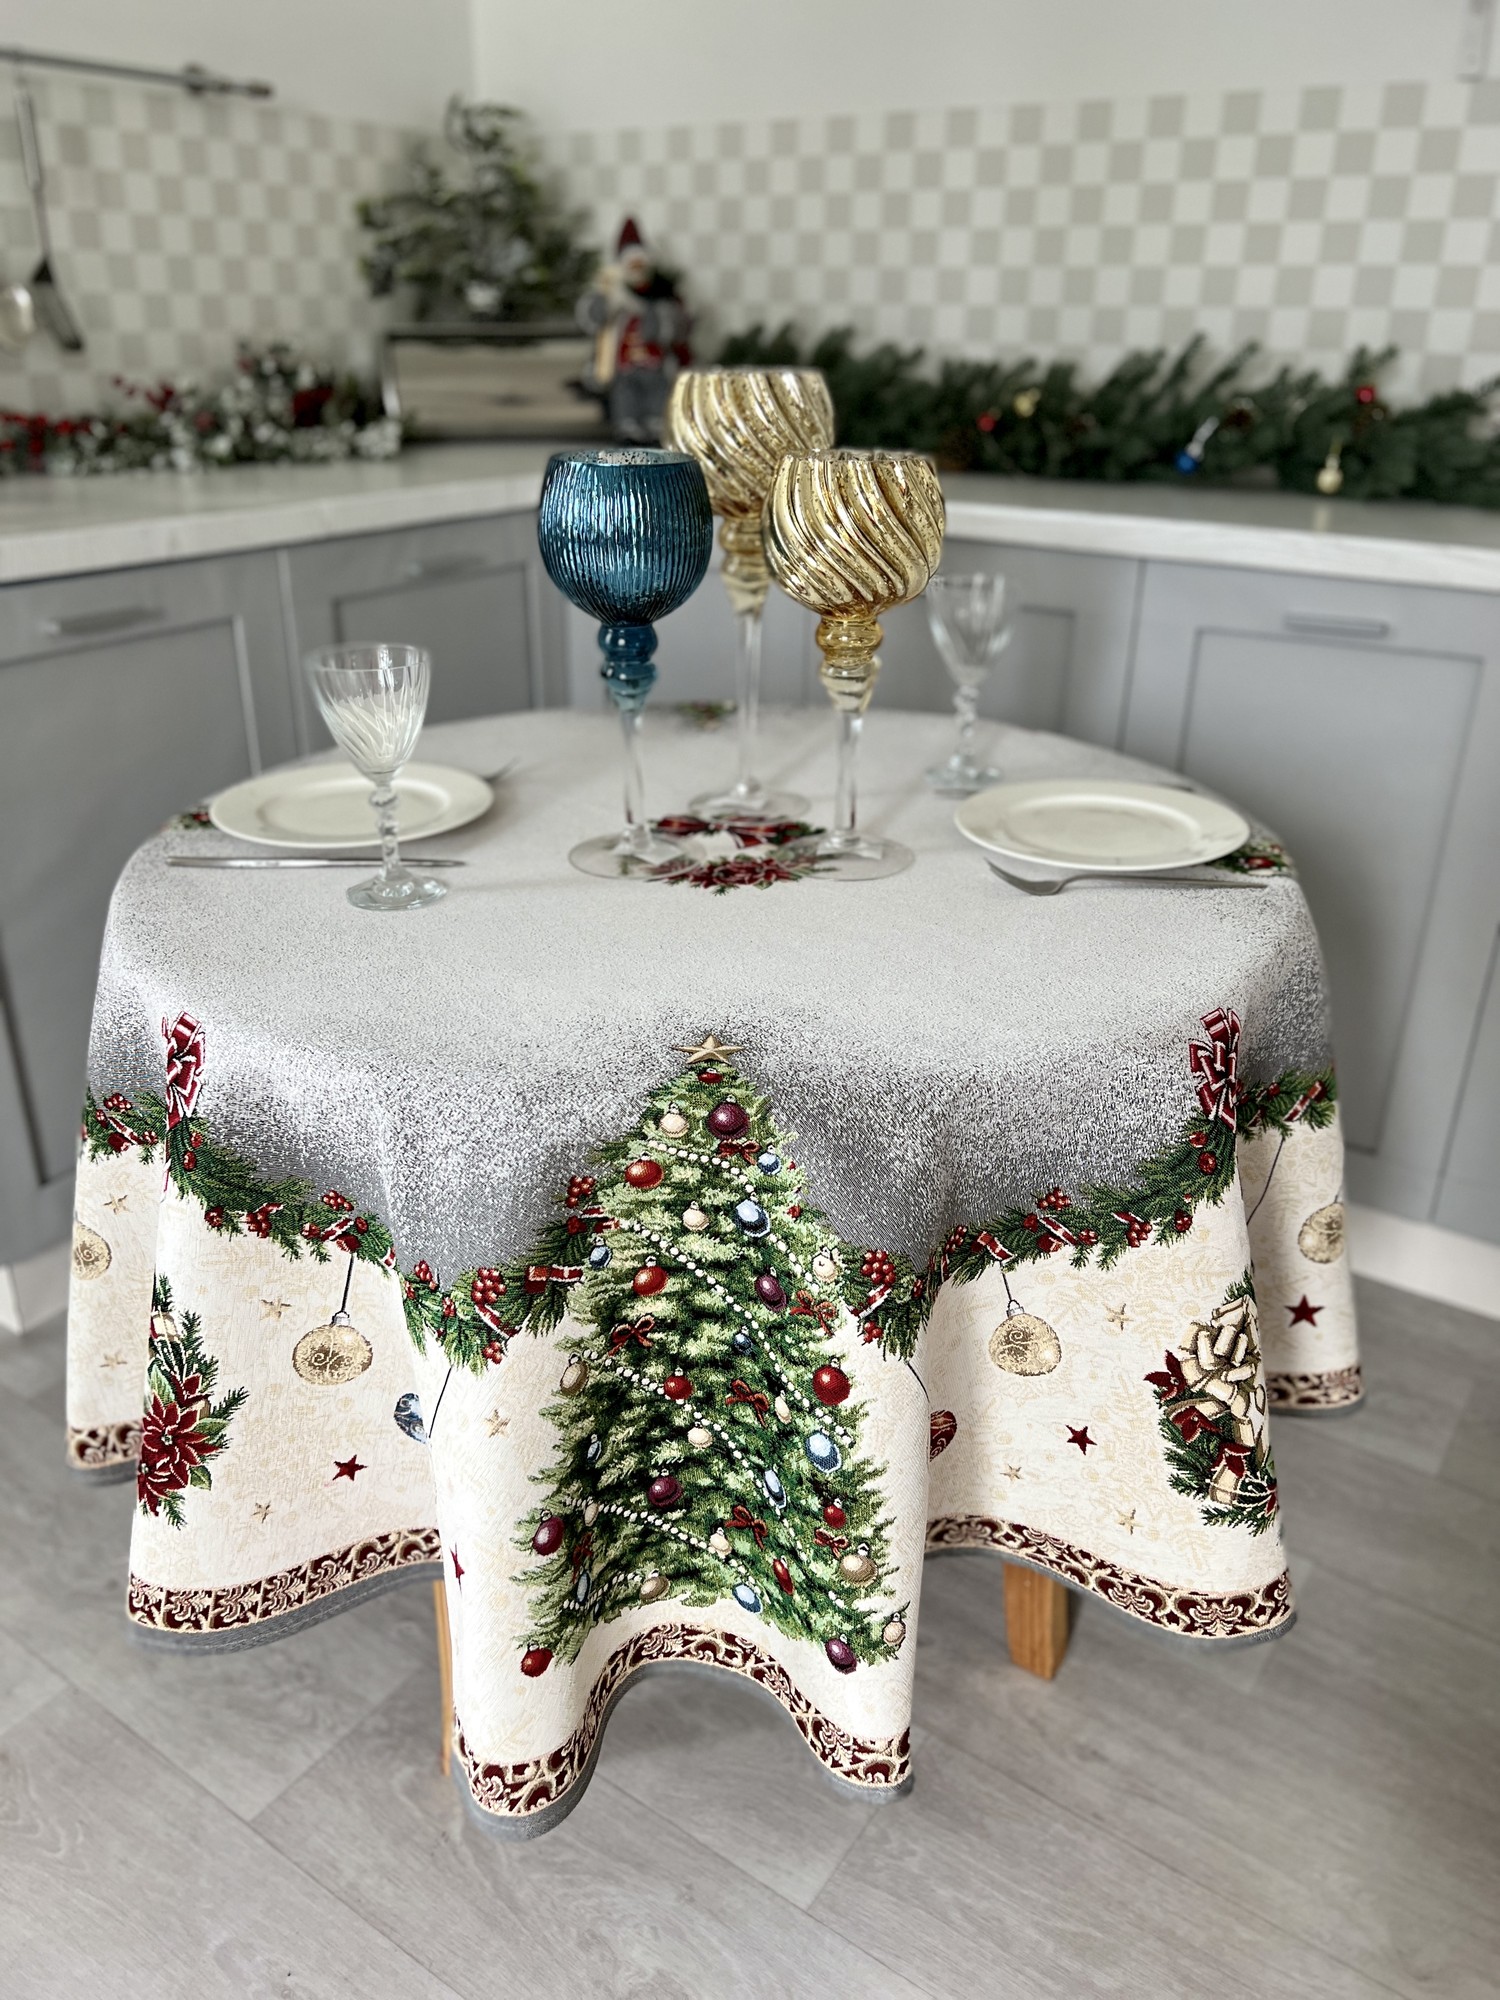 Christmas tapestry tablecloth for round table ø137 cm (55 in), round festive tablecloth